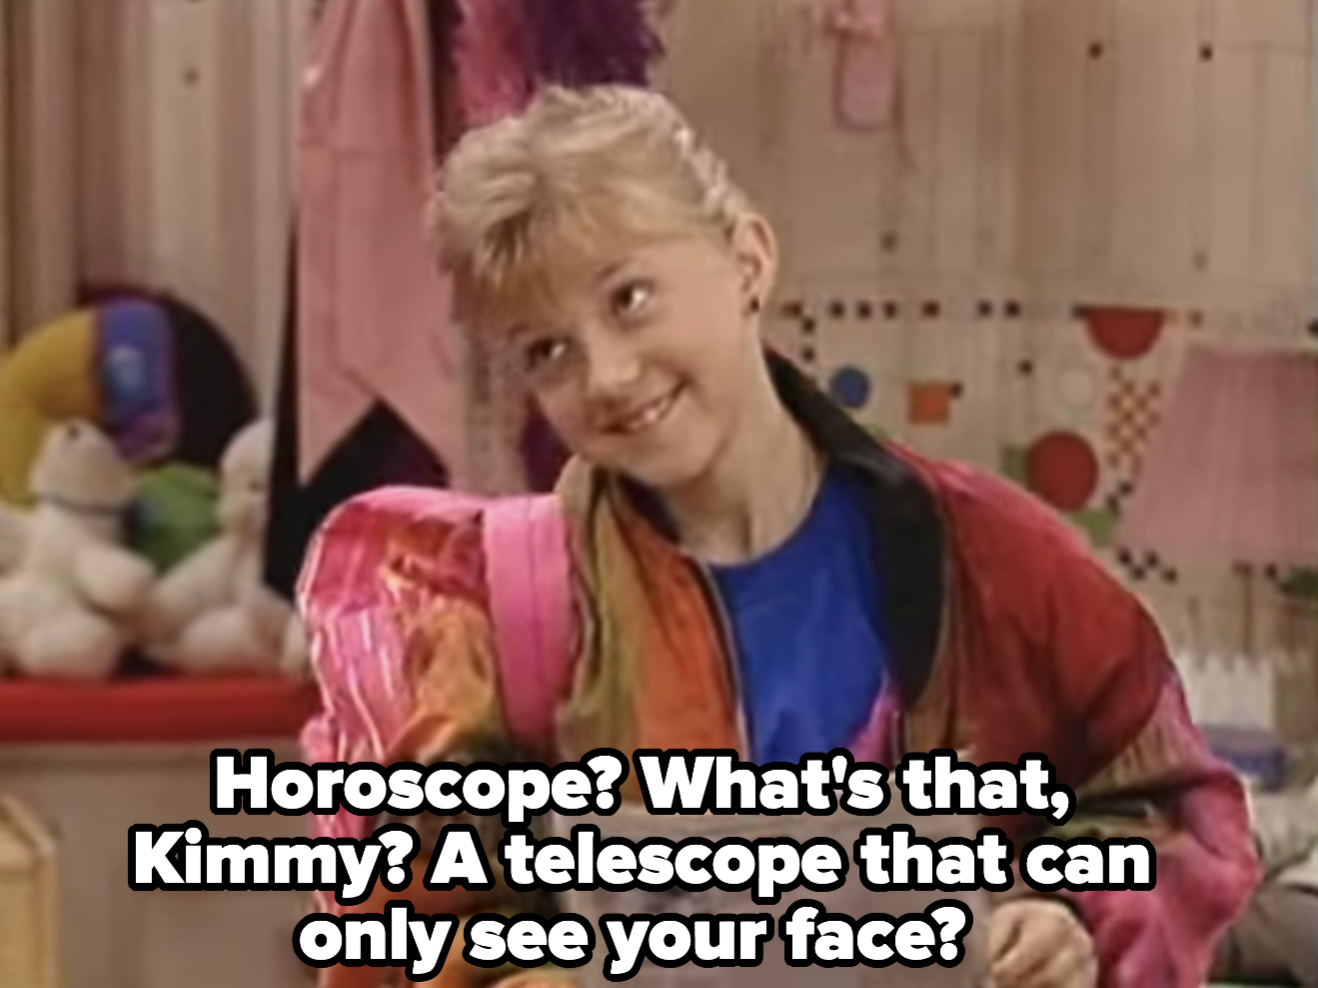 Stephanie says, &quot;horoscope? what&#x27;s that, Kimmy? A telescope that can only see your face&quot;